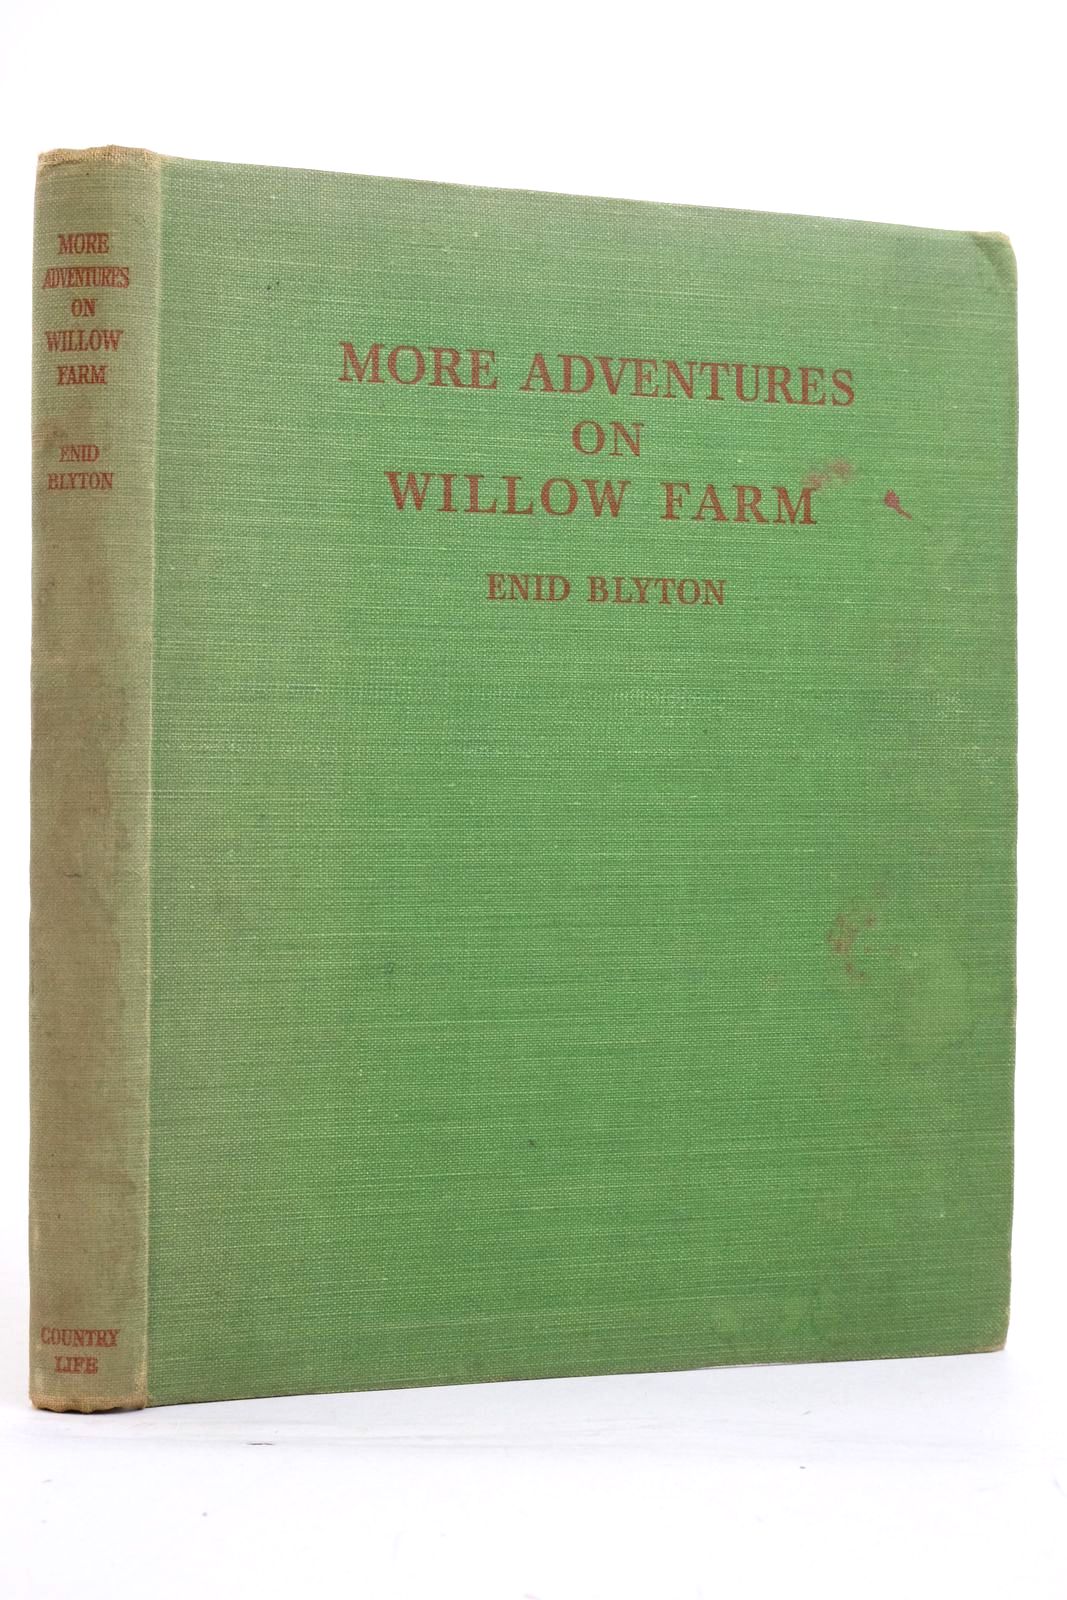 Photo of MORE ADVENTURES ON WILLOW FARM written by Blyton, Enid illustrated by Soper, Eileen published by Country Life (STOCK CODE: 2137025)  for sale by Stella & Rose's Books